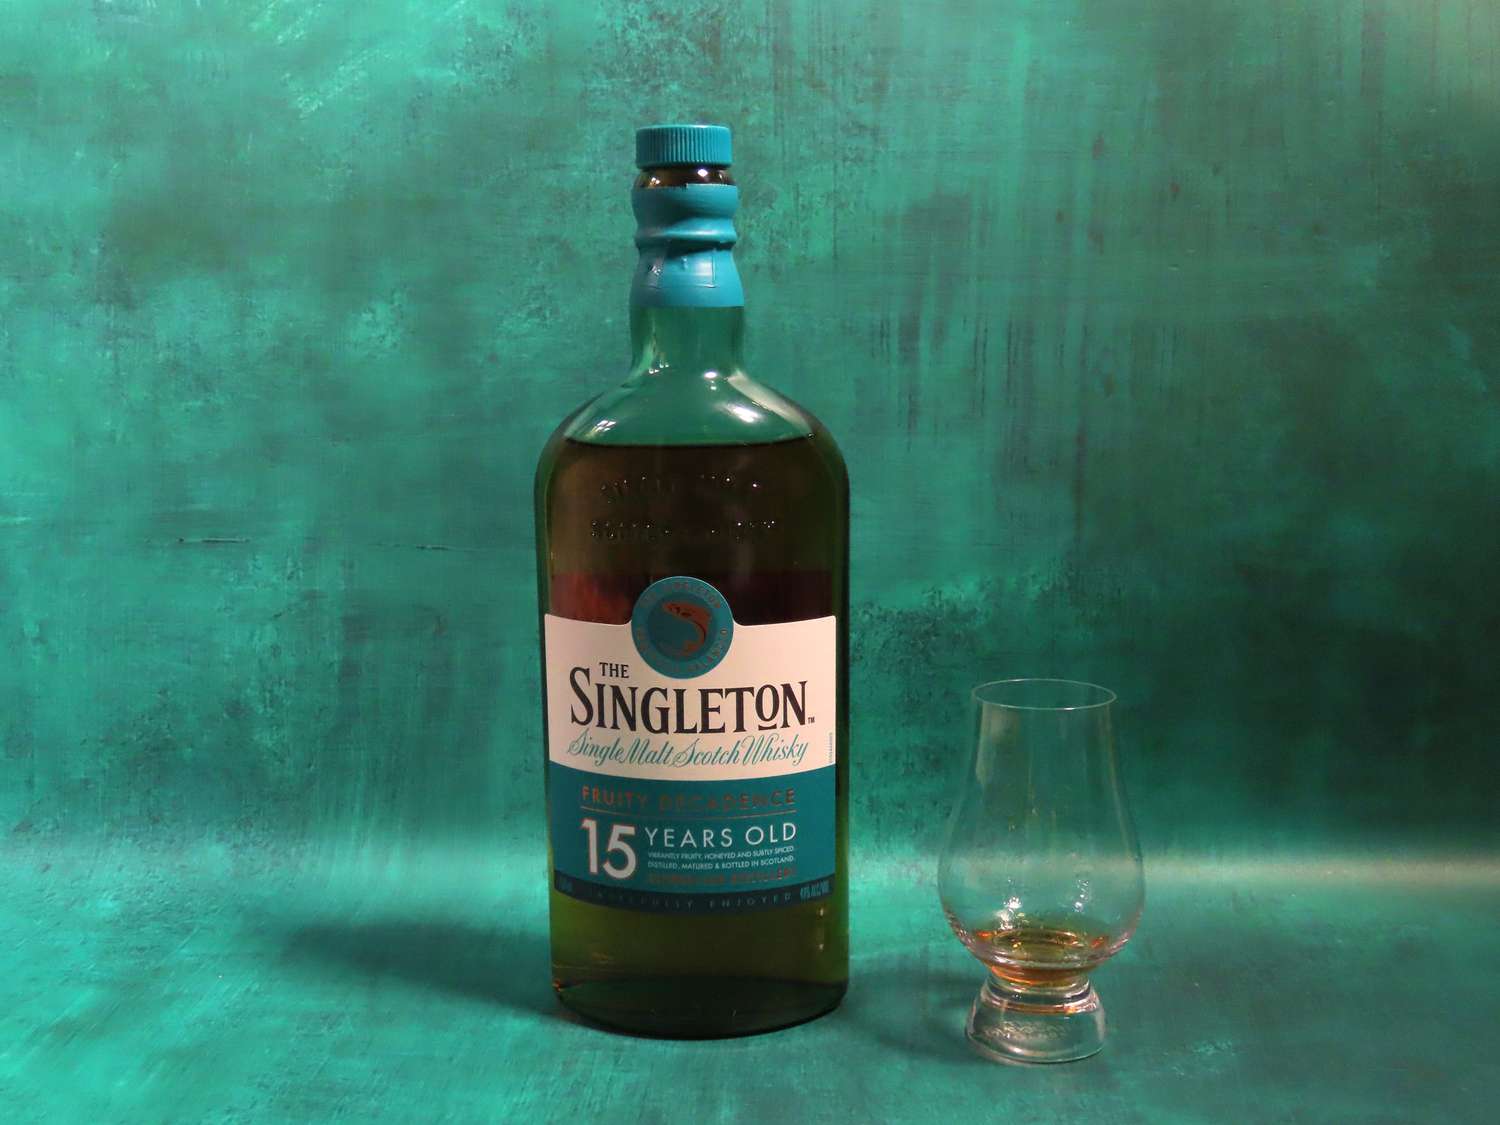 a bottle of singleton on a blue-green surface with a whisky glass beside it